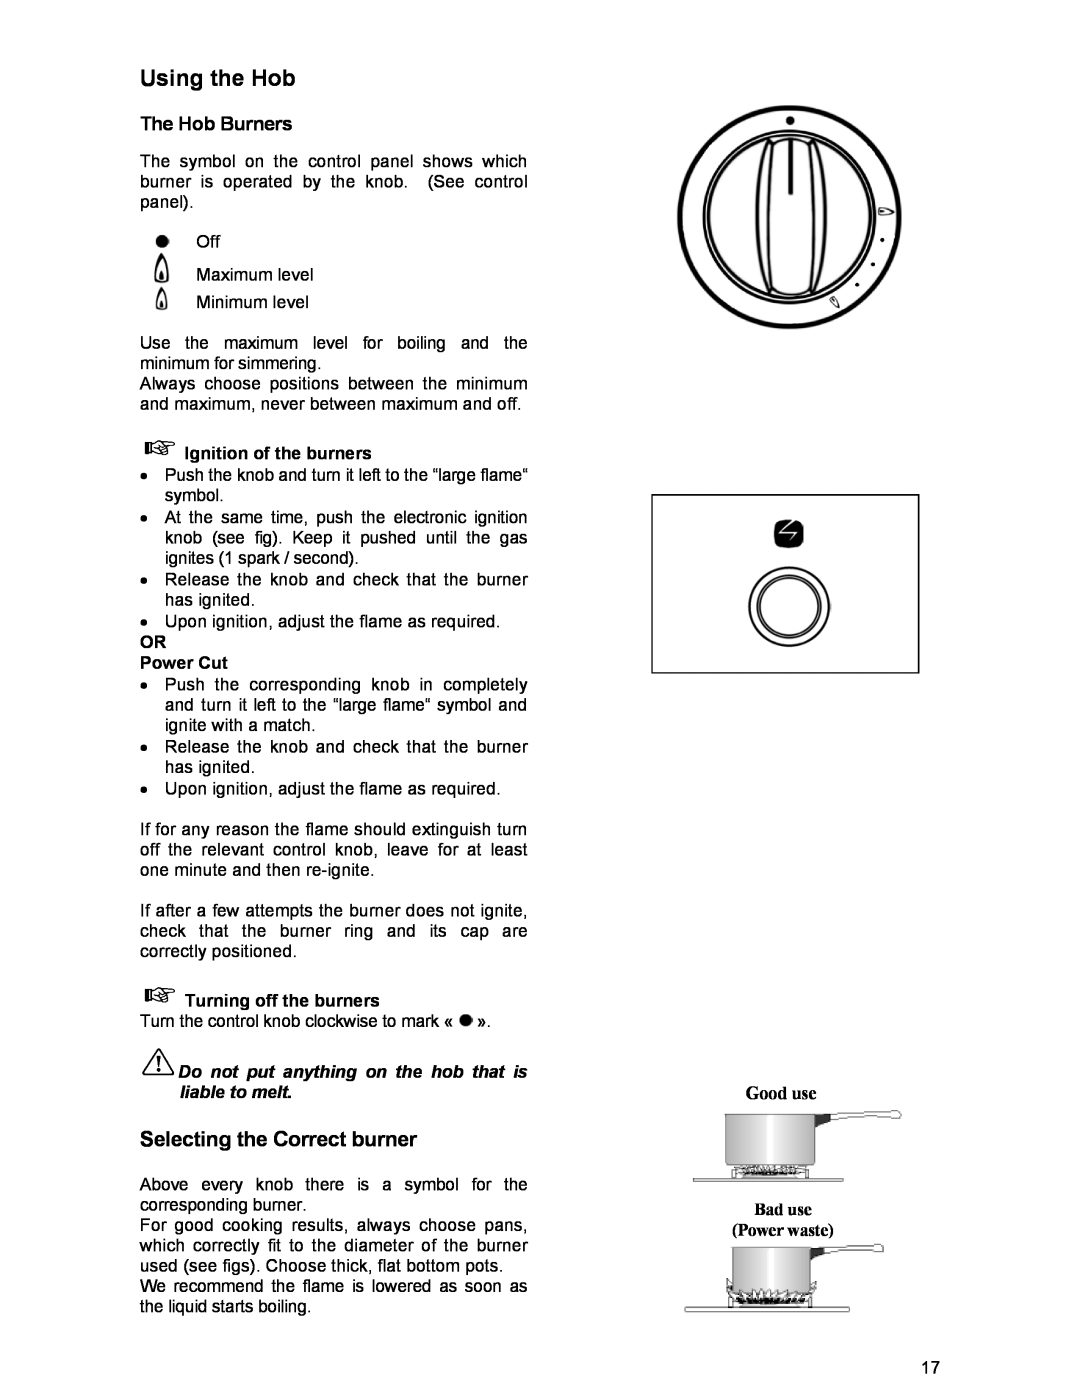 Electrolux DSO51DF manual Using the Hob, Selecting the Correct burner, The Hob Burners, Good use, Bad use Power waste 